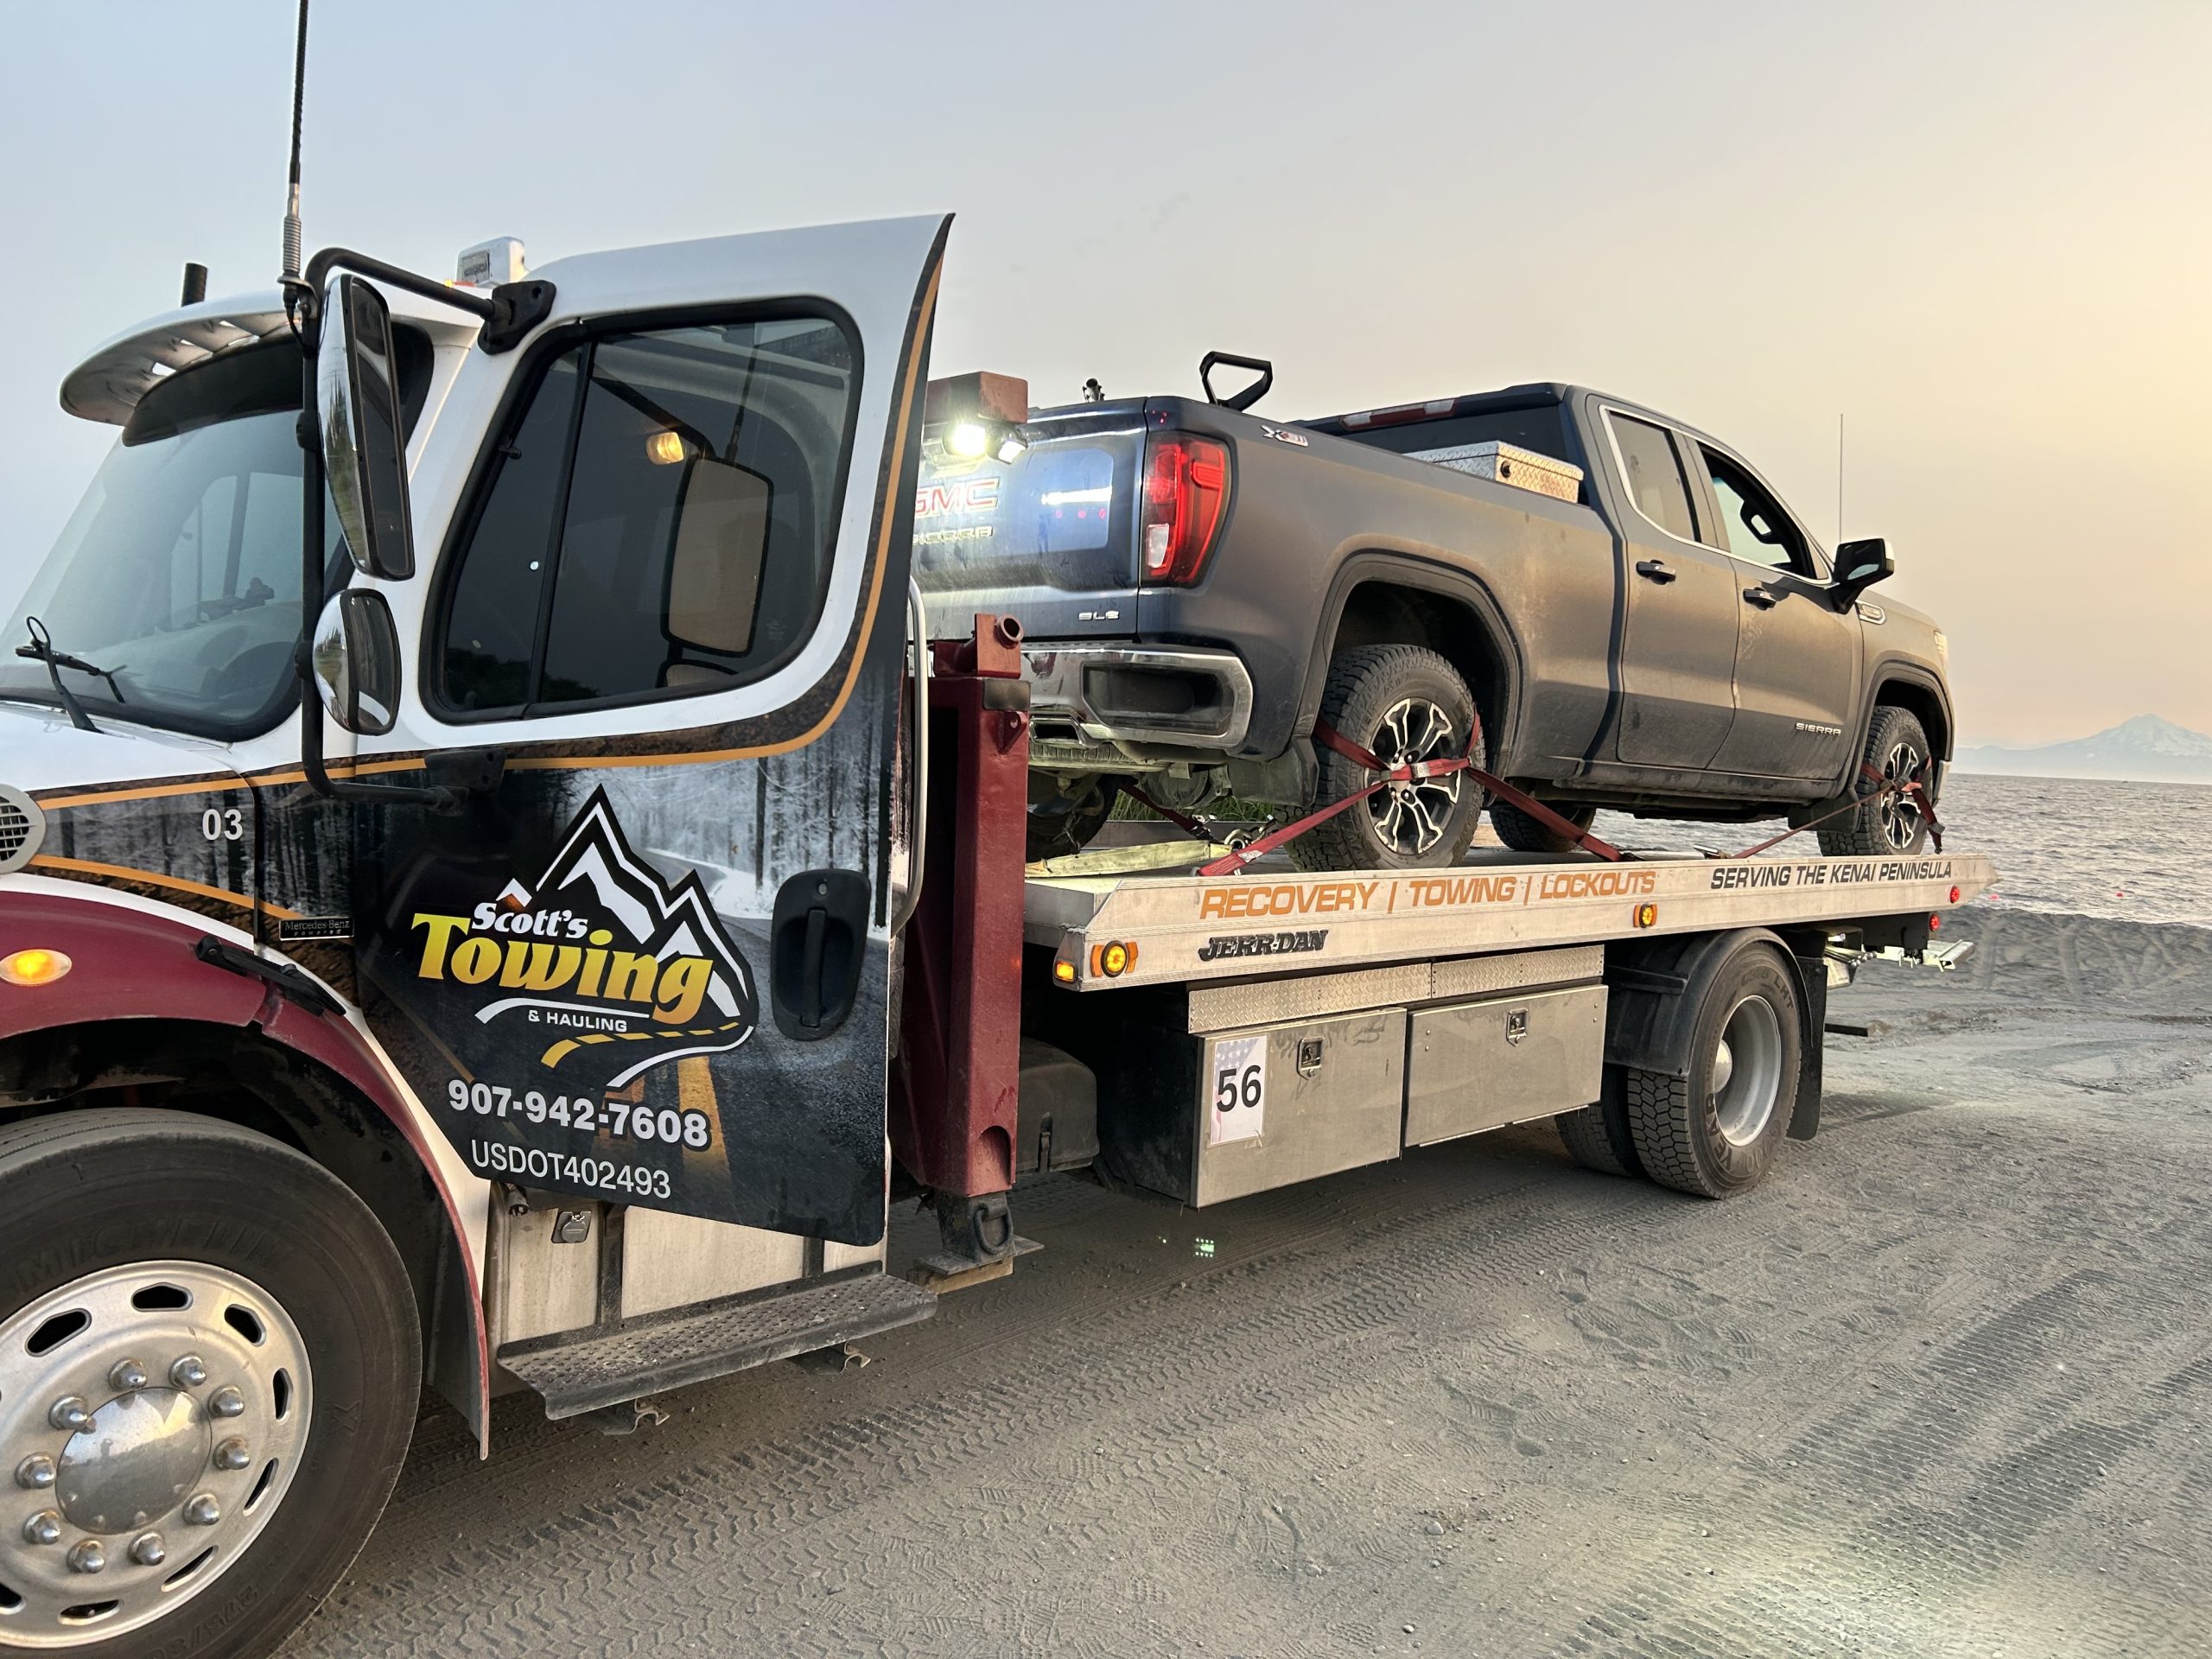 this image shows roadside assistance in Soldotna, AK